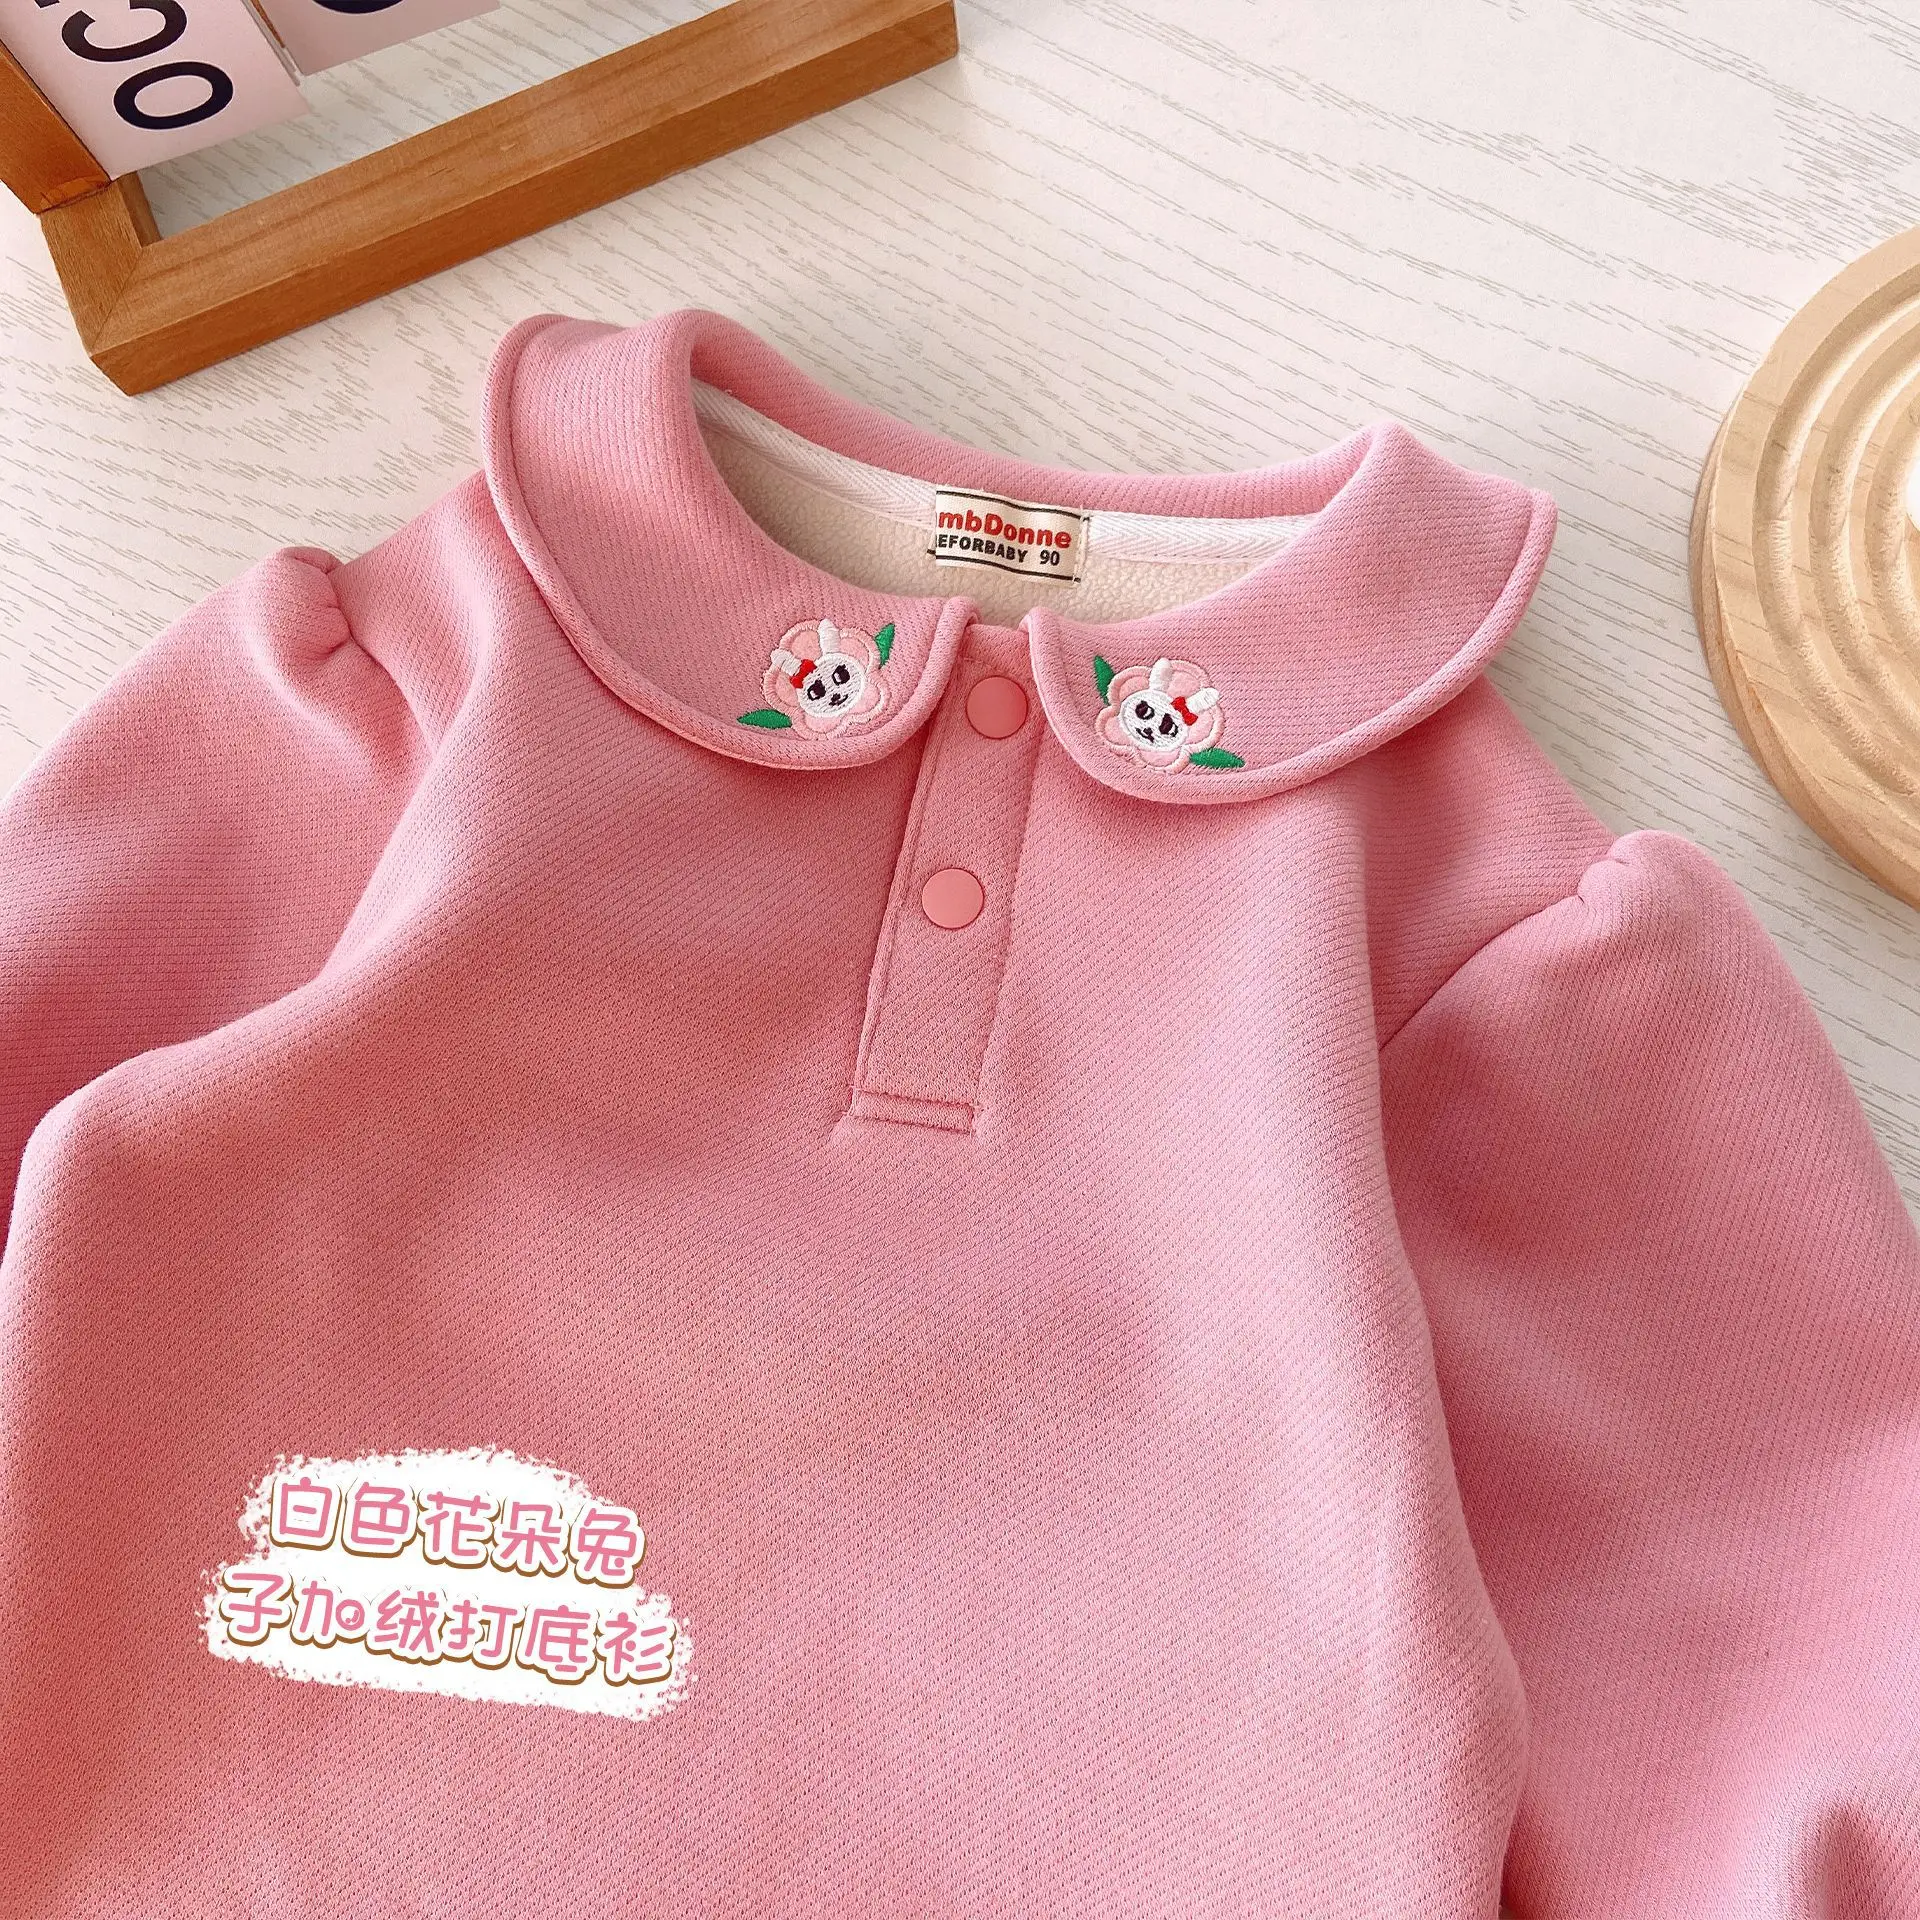 90-130cm Girl Bottoming Shirt Girl Padded Warm Tops Baby T-shirts Kids Clothes Girls Cherry Embroidery Pattern Lapel Neck Top enlarge